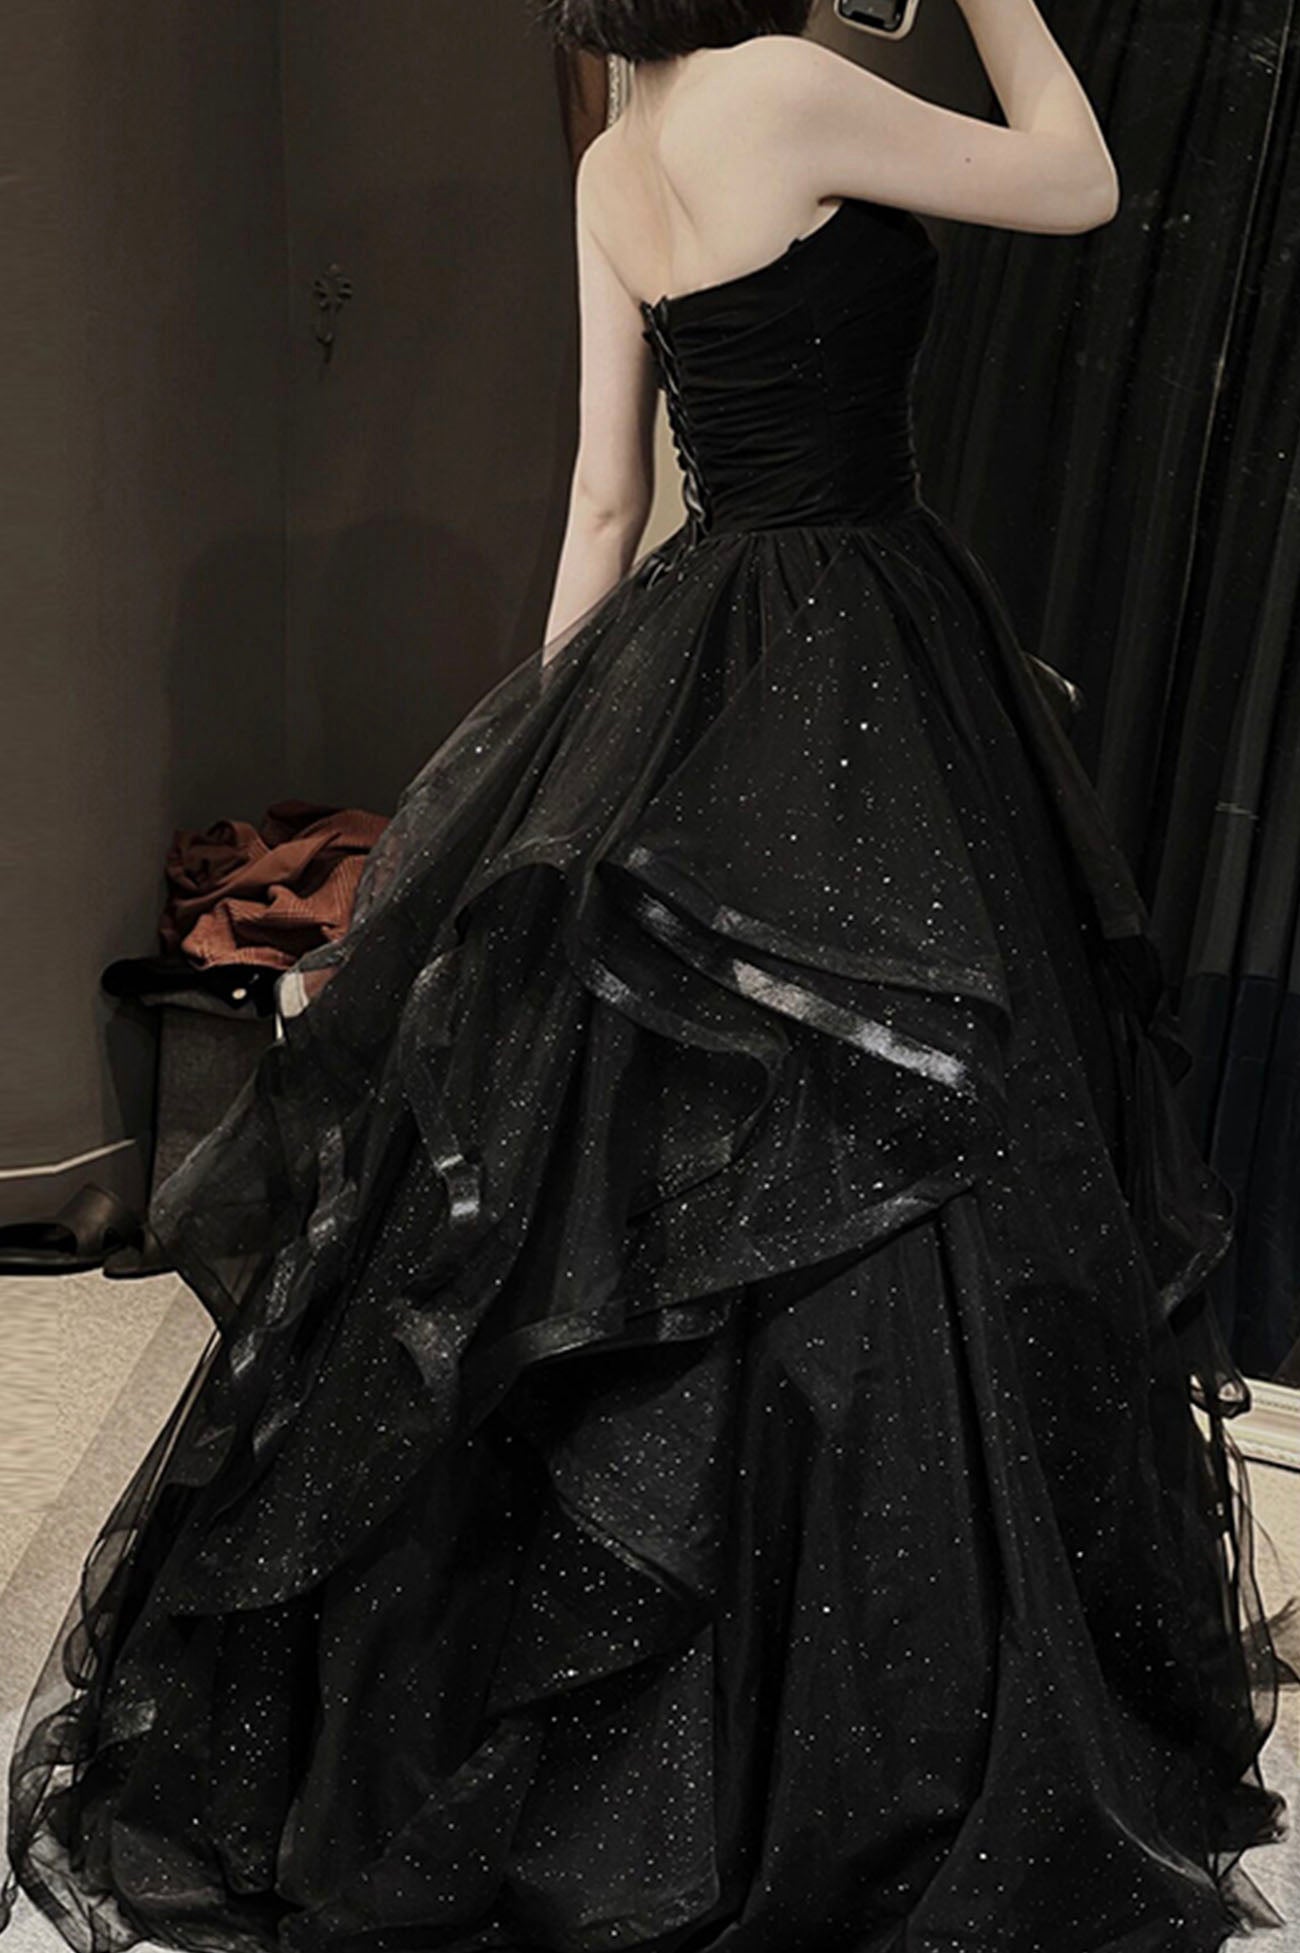 Black Tulle Layers Long A-Line Prom Dress, Black Strapless Evening Dre